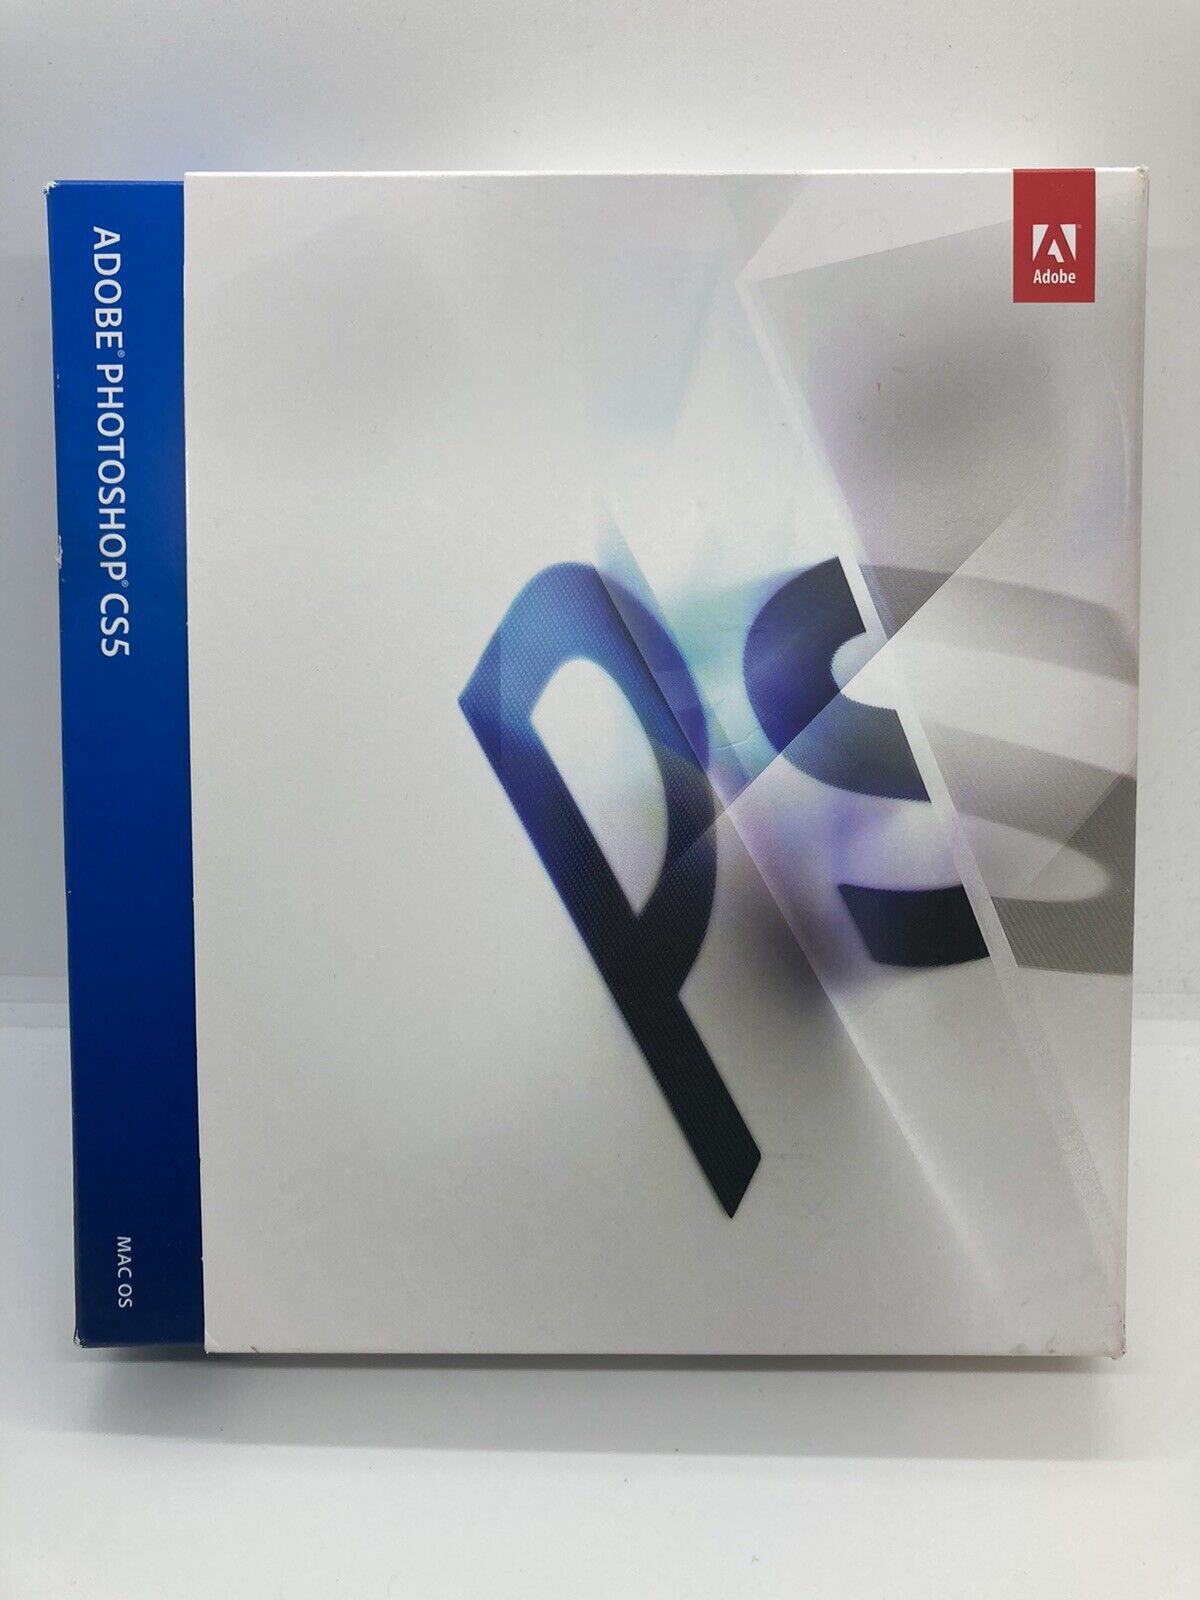 Adobe Photoshop CS5 With Serial Number - Mac OS